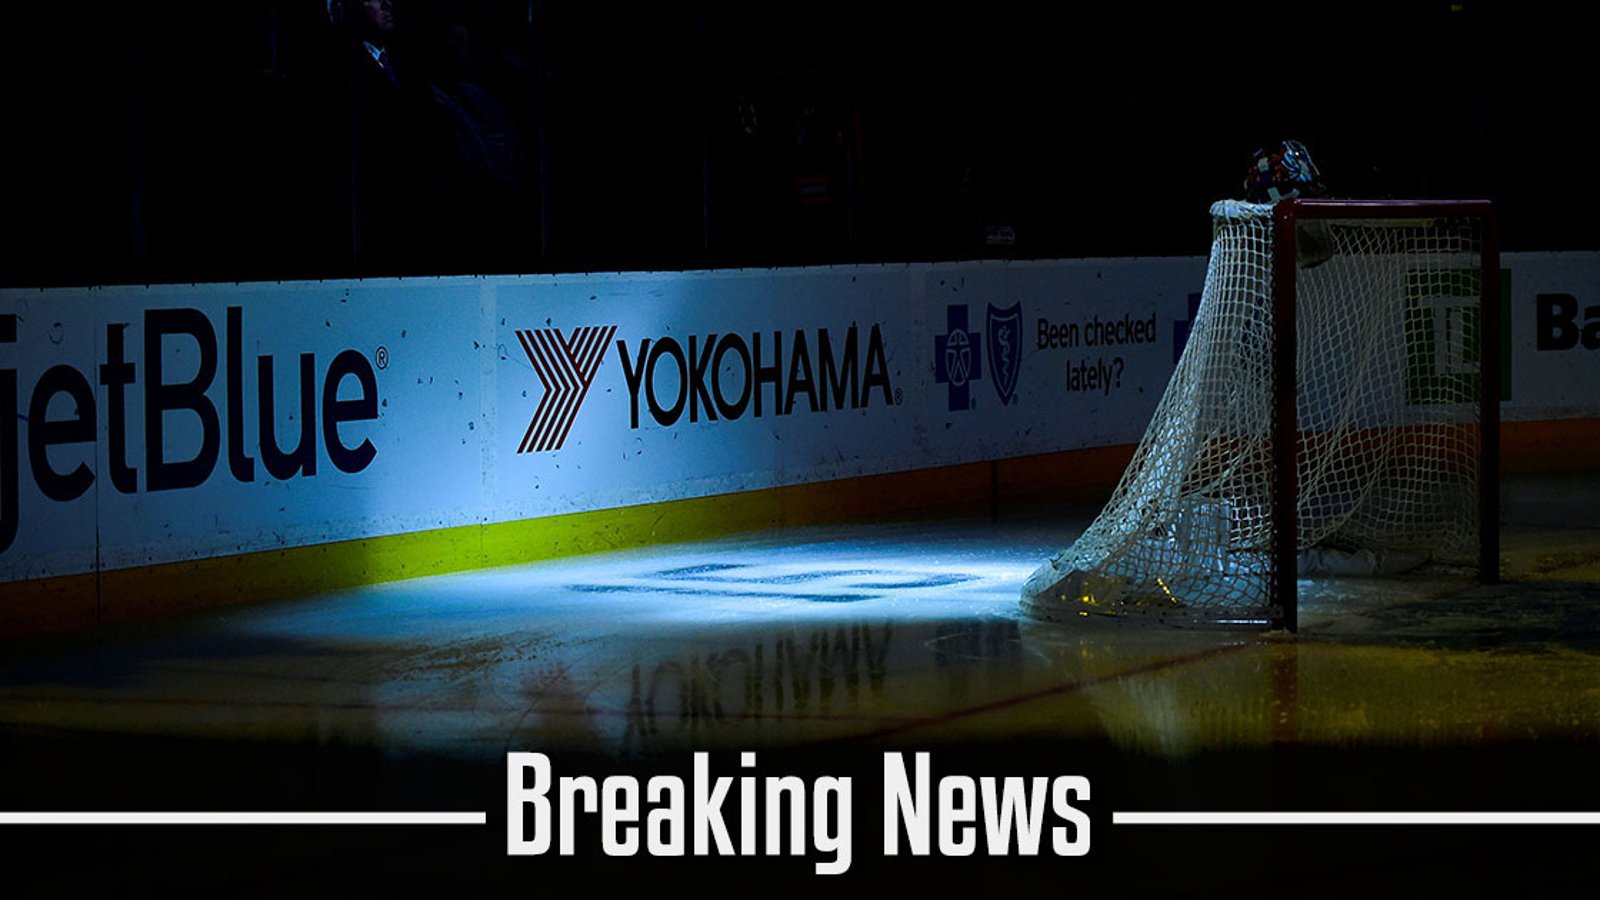 Rumor: Veteran goalie uncertain about his future after major front office shake up.